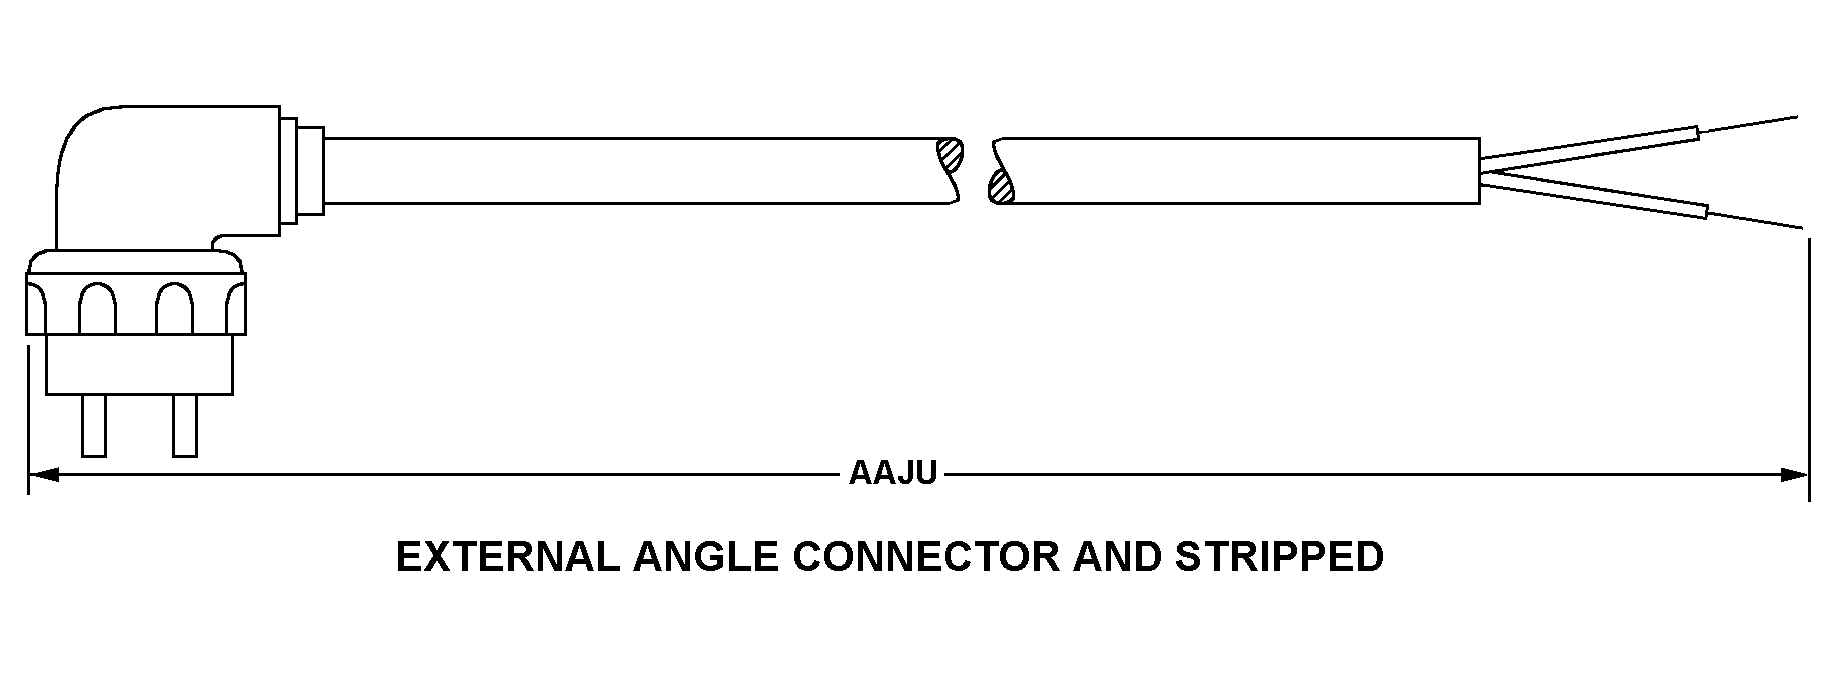 EXTERNAL ANGLE CONNECTOR AND STRIPPED style nsn 5995-01-190-2802